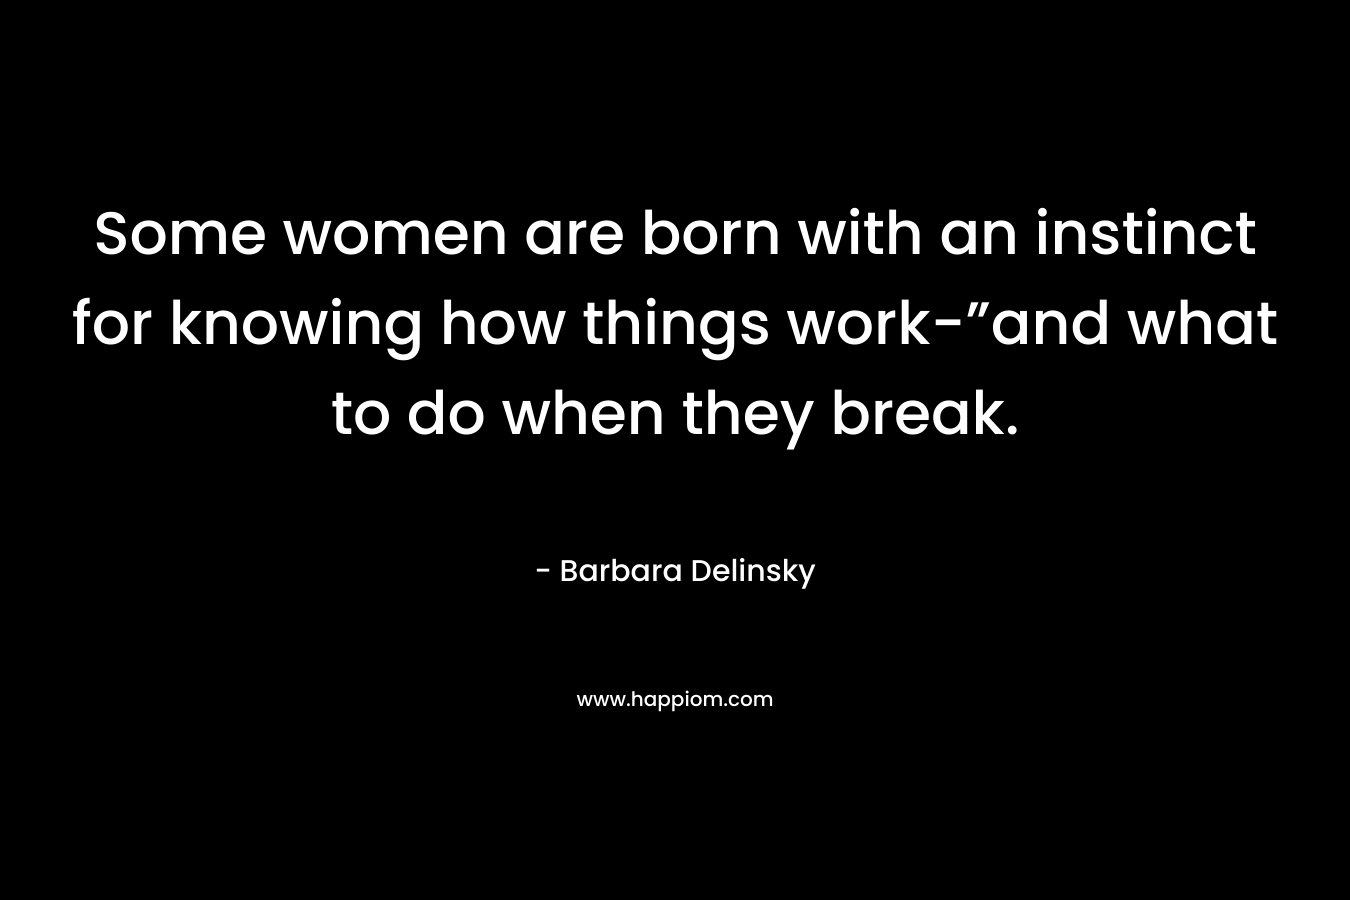 Some women are born with an instinct for knowing how things work-”and what to do when they break.